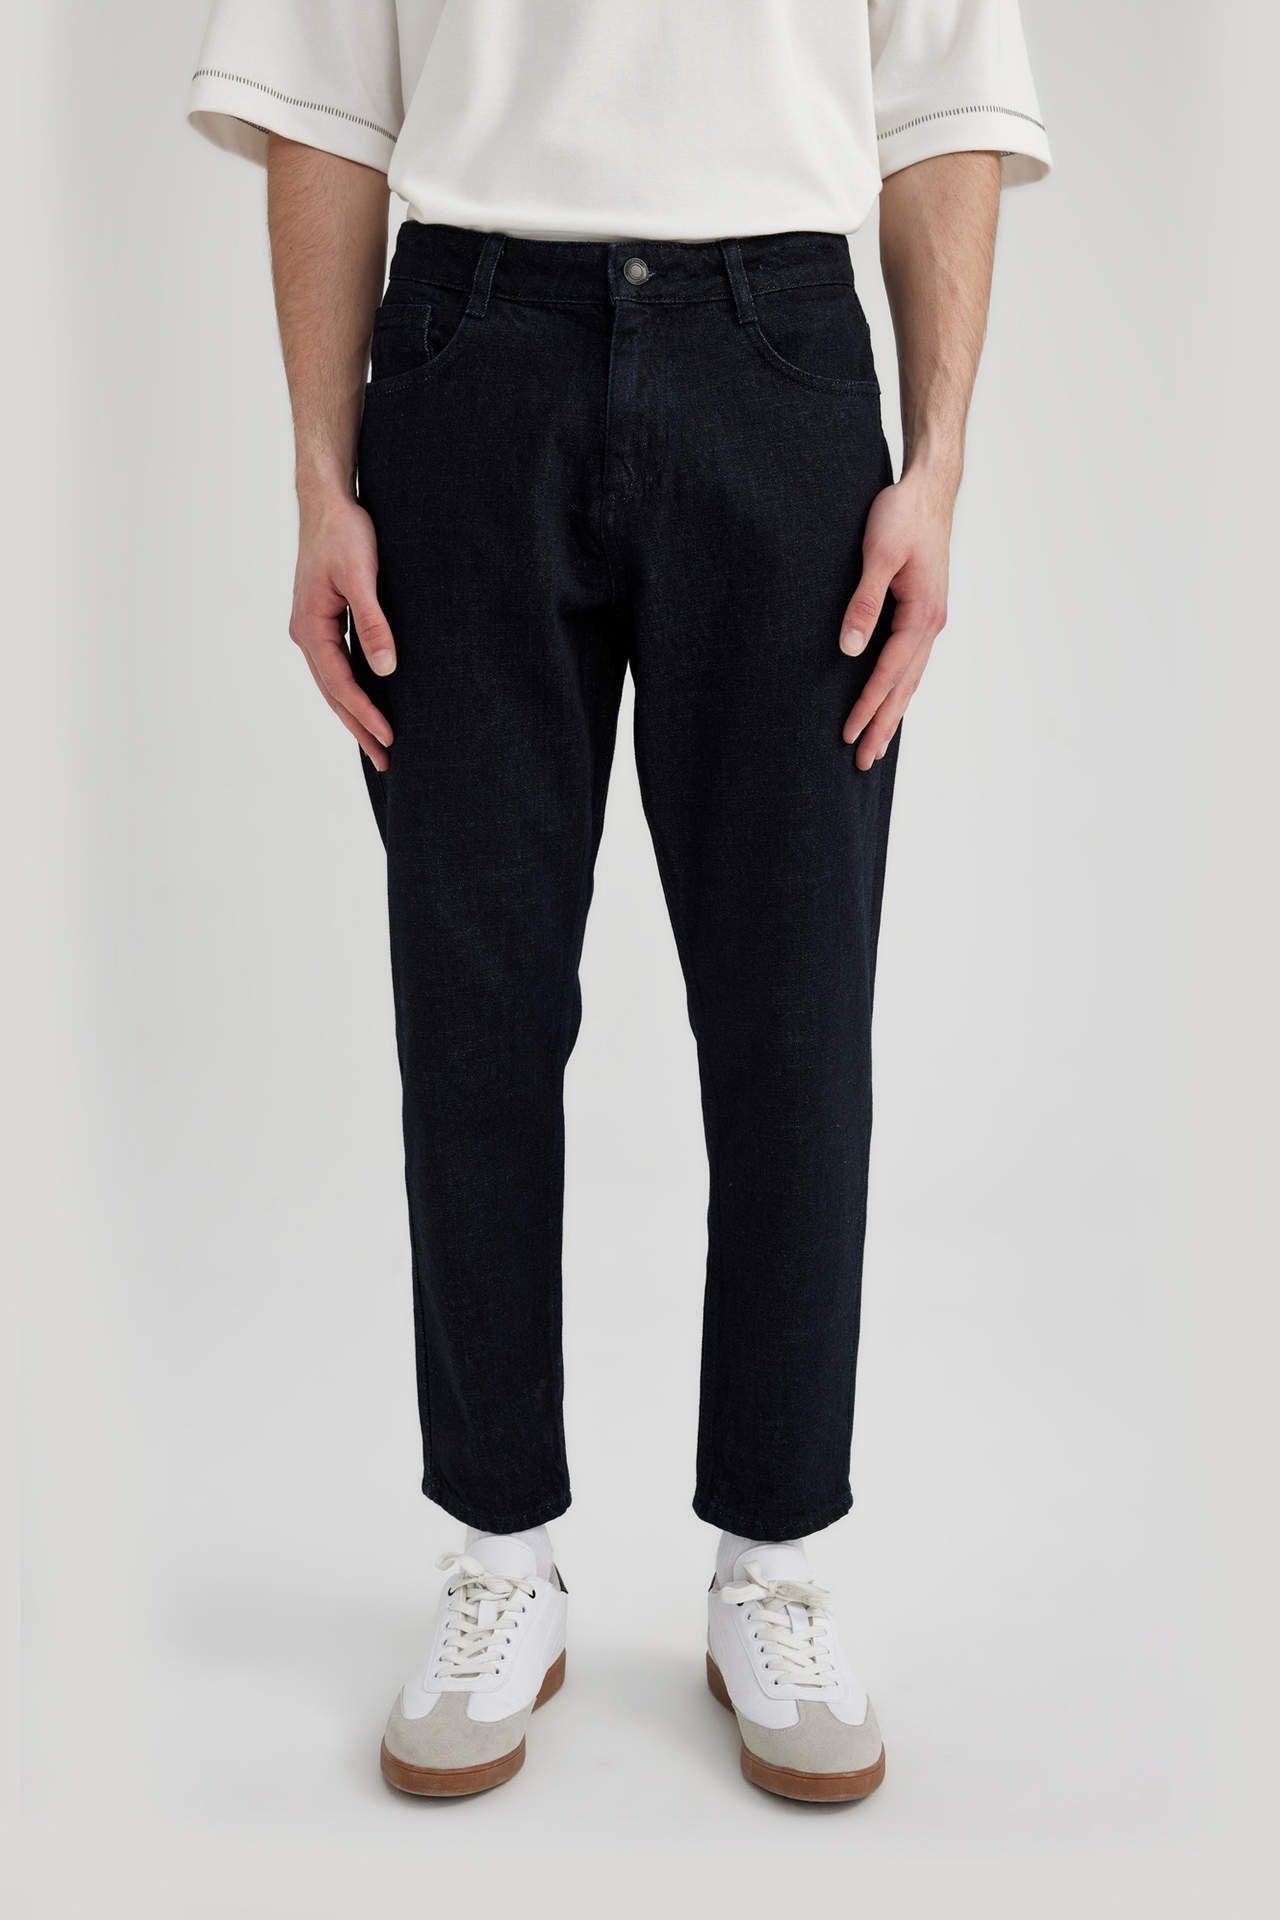 DEFACTO Relaxed Carrot Fit Jean Jeans